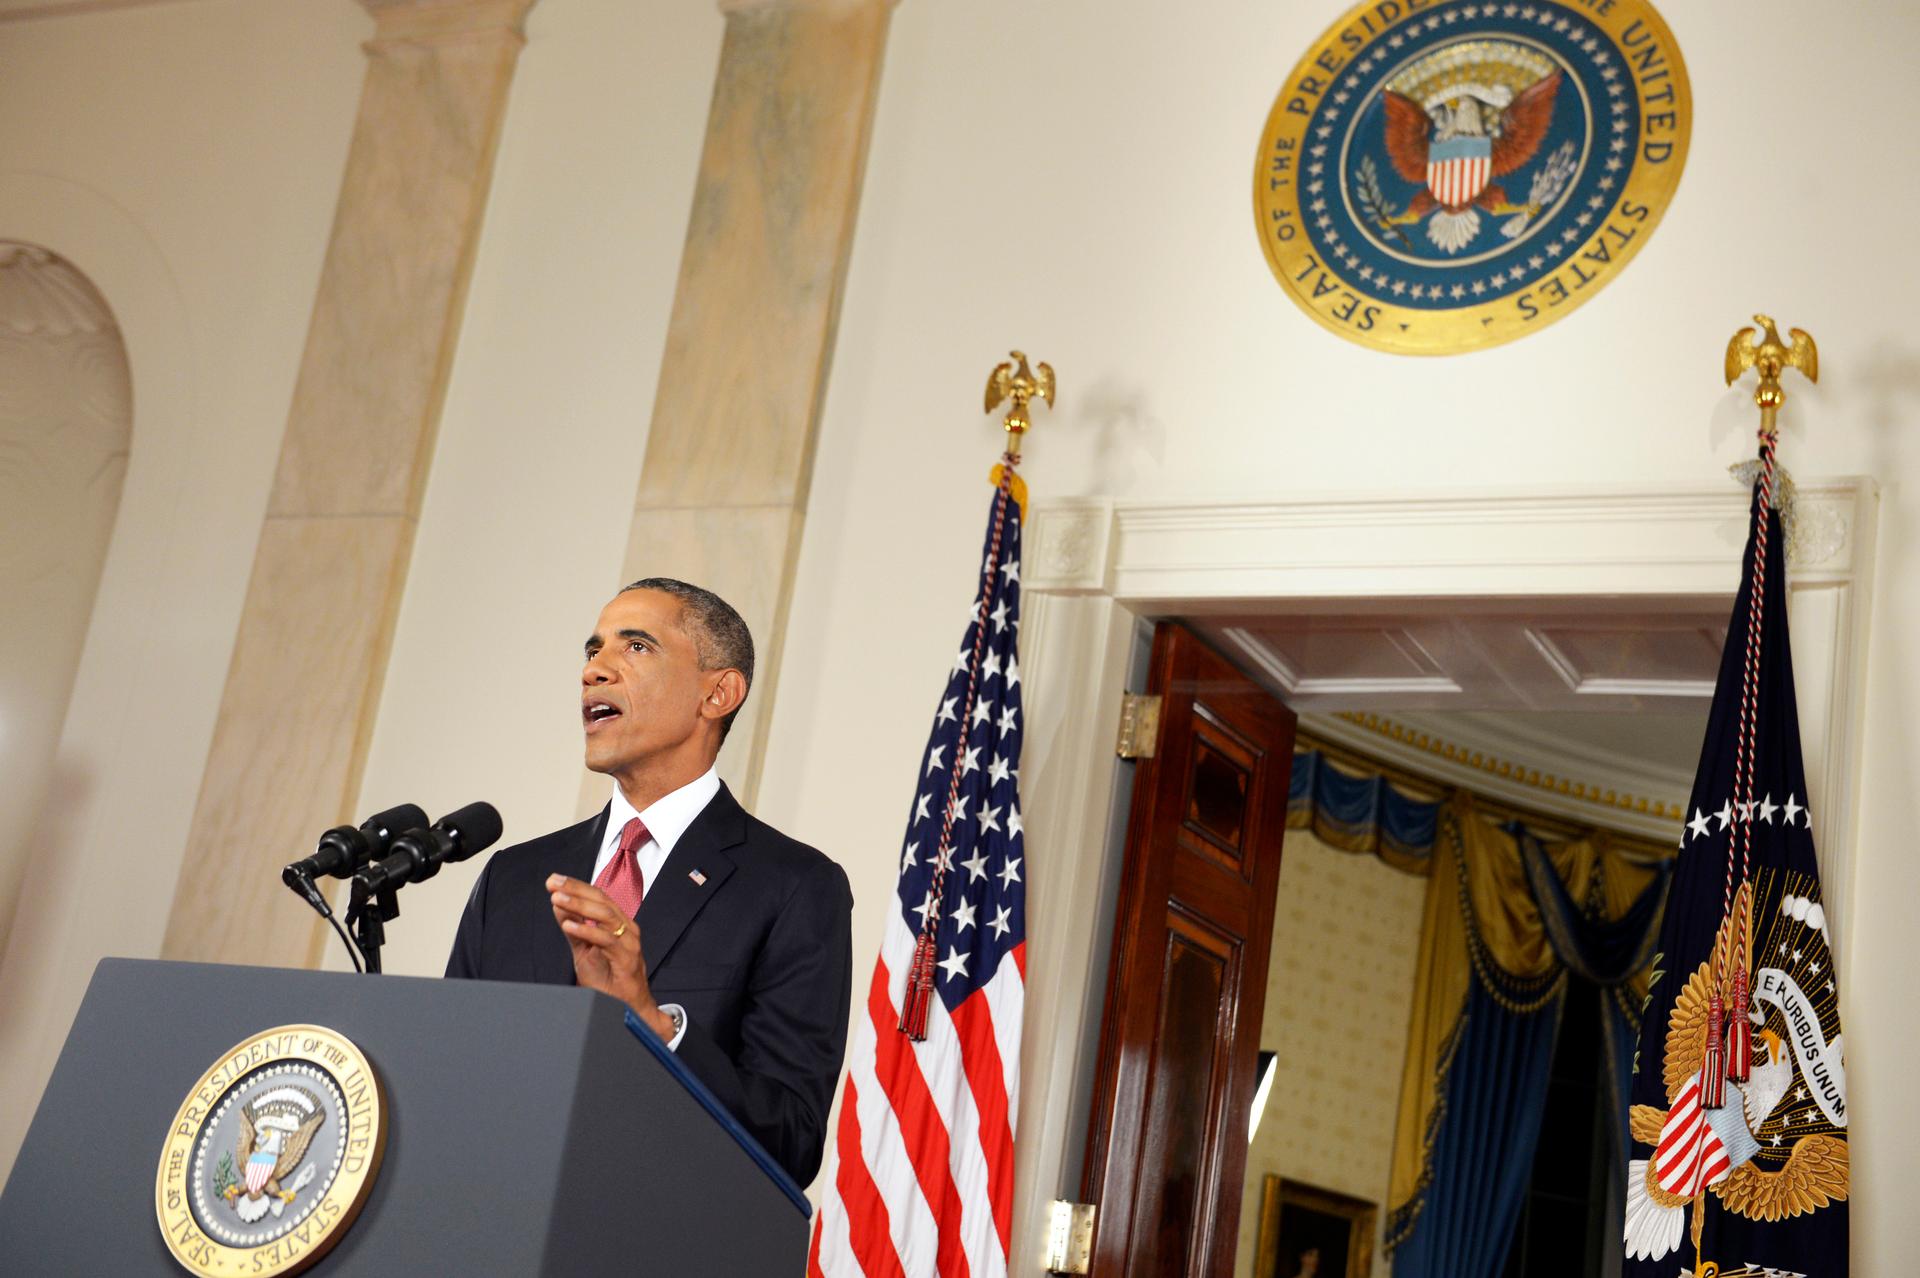 President Barack Obama delivering his address to the nation, Wednesday, on his plans for military action against the Islamic State, from the Cross Hall of the White House.